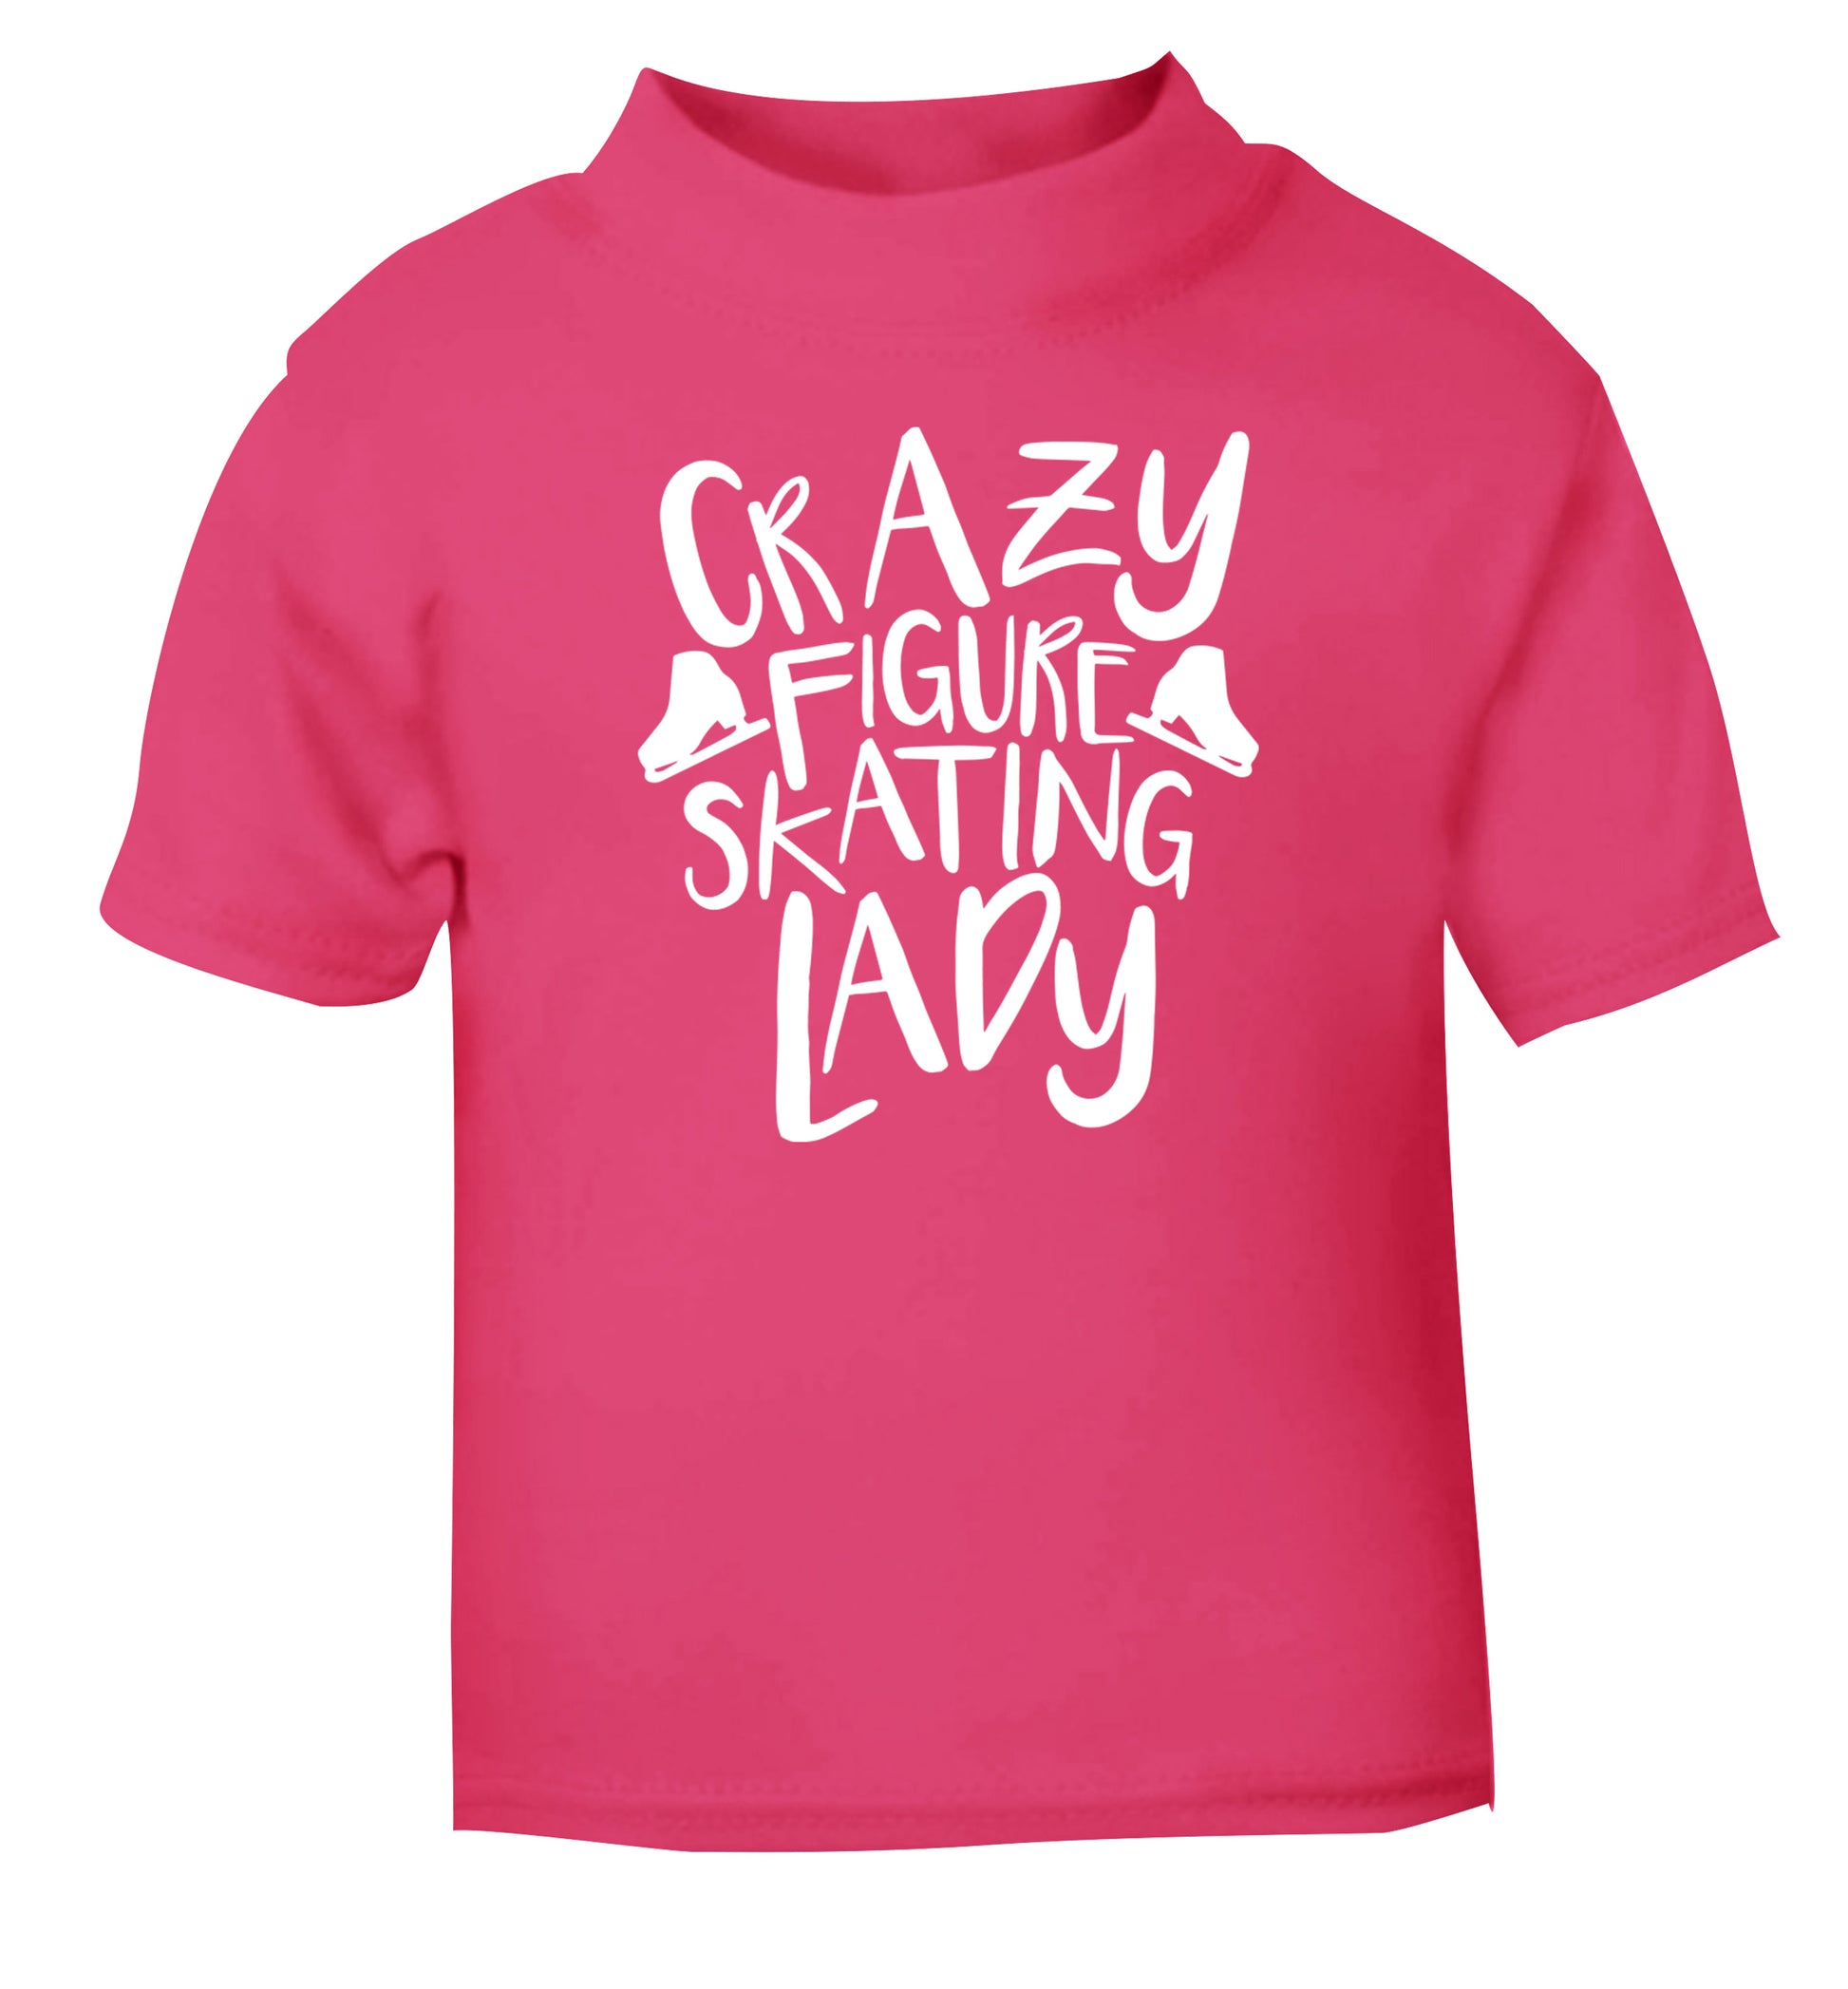 Crazy figure skating lady pink Baby Toddler Tshirt 2 Years